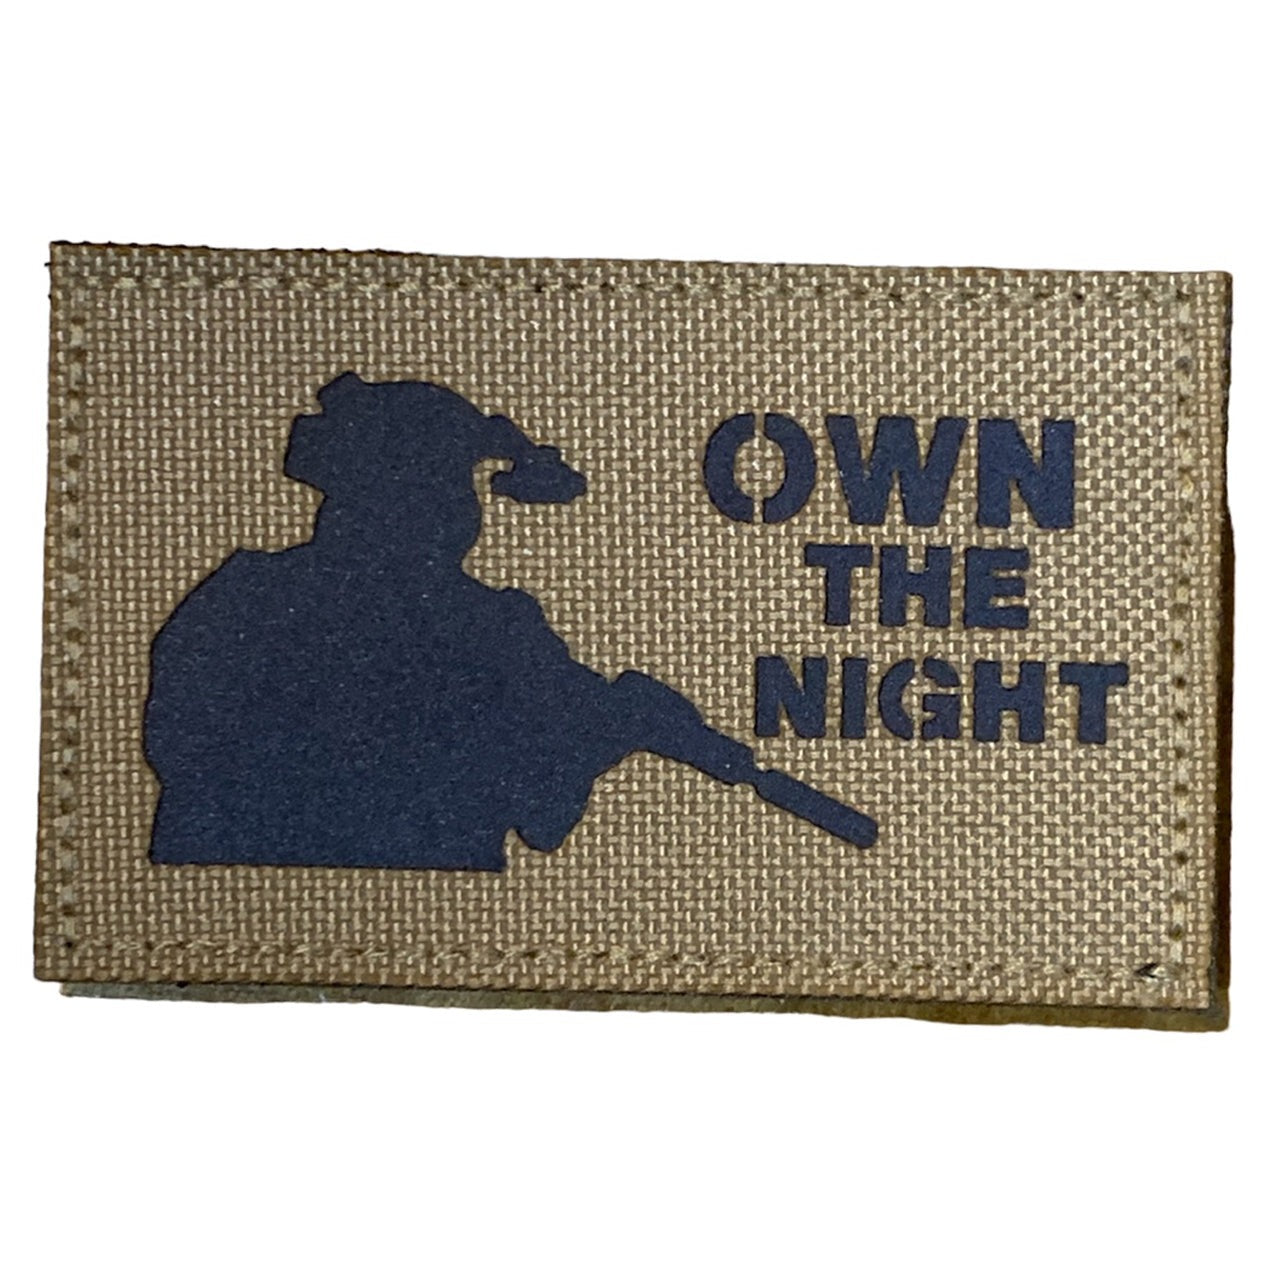 Own The Night Laser Cut Tan Patch Hook & Loop.   Size: 8x5cm  HOOK AND LOOP BACKED PATCH(BOTH PROVIDED) www.moralepatches.com.au